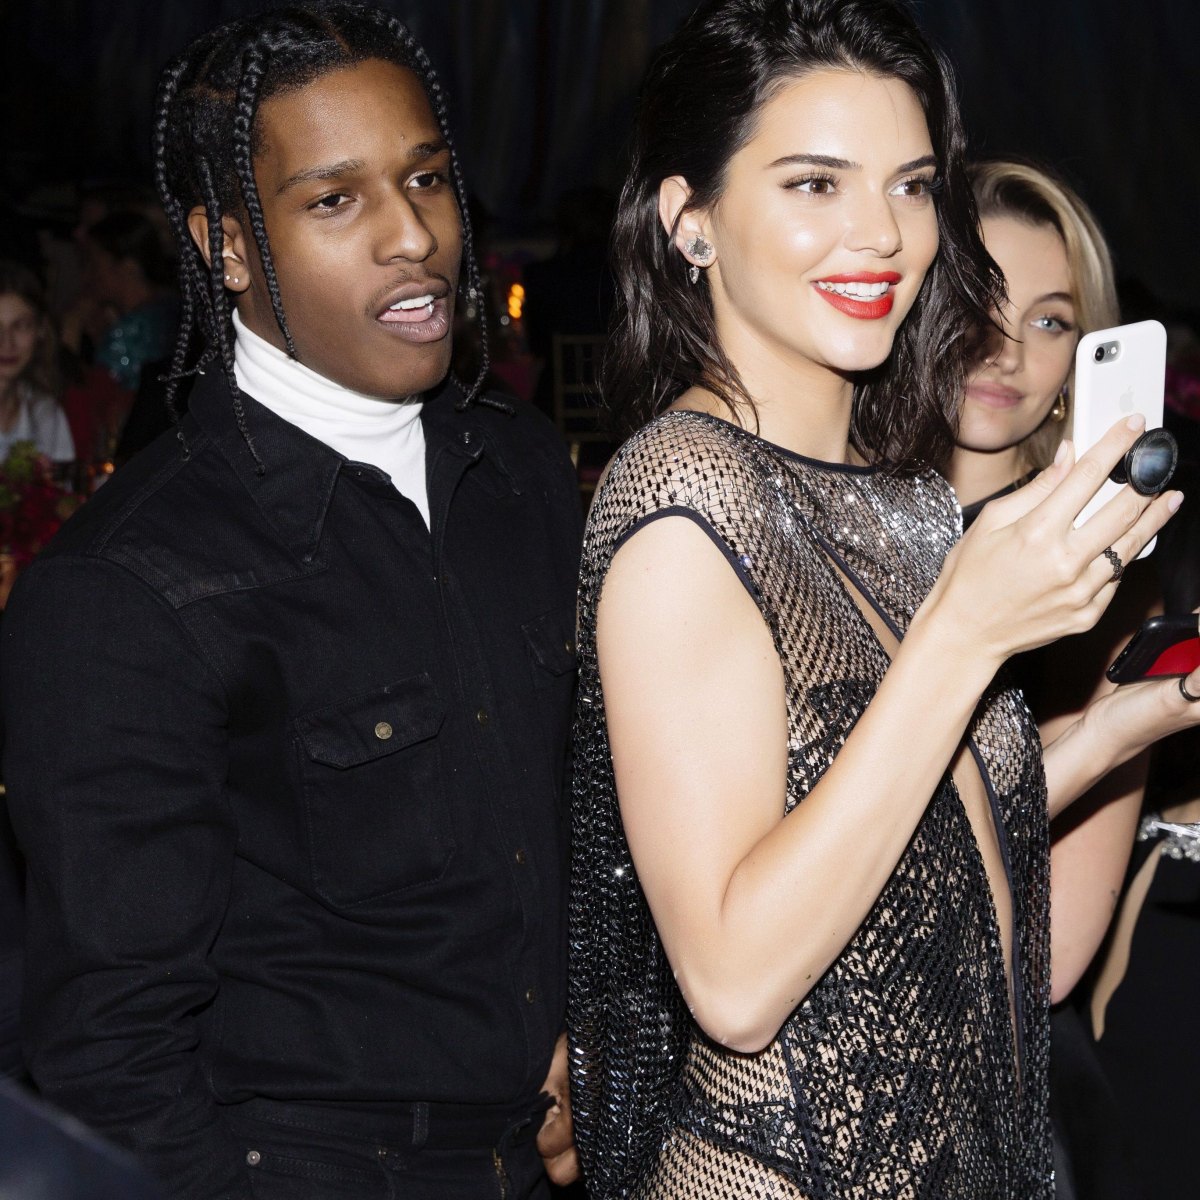 Who Has A$AP Rocky Dated?